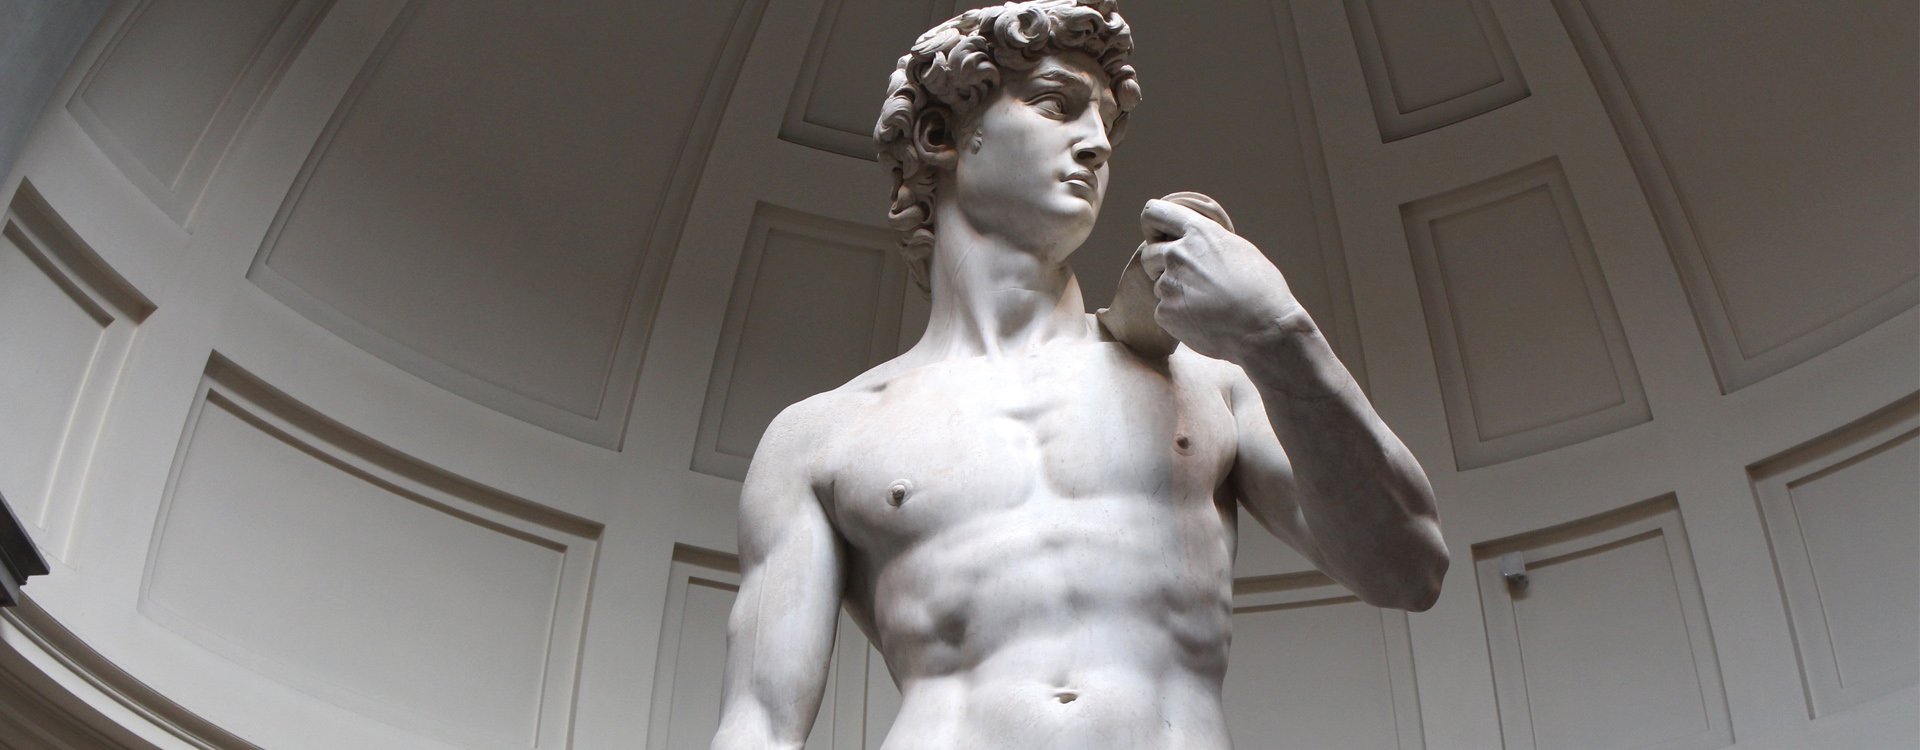 David is a masterpiece of Renaissance sculpture created in marble by Michelangelo